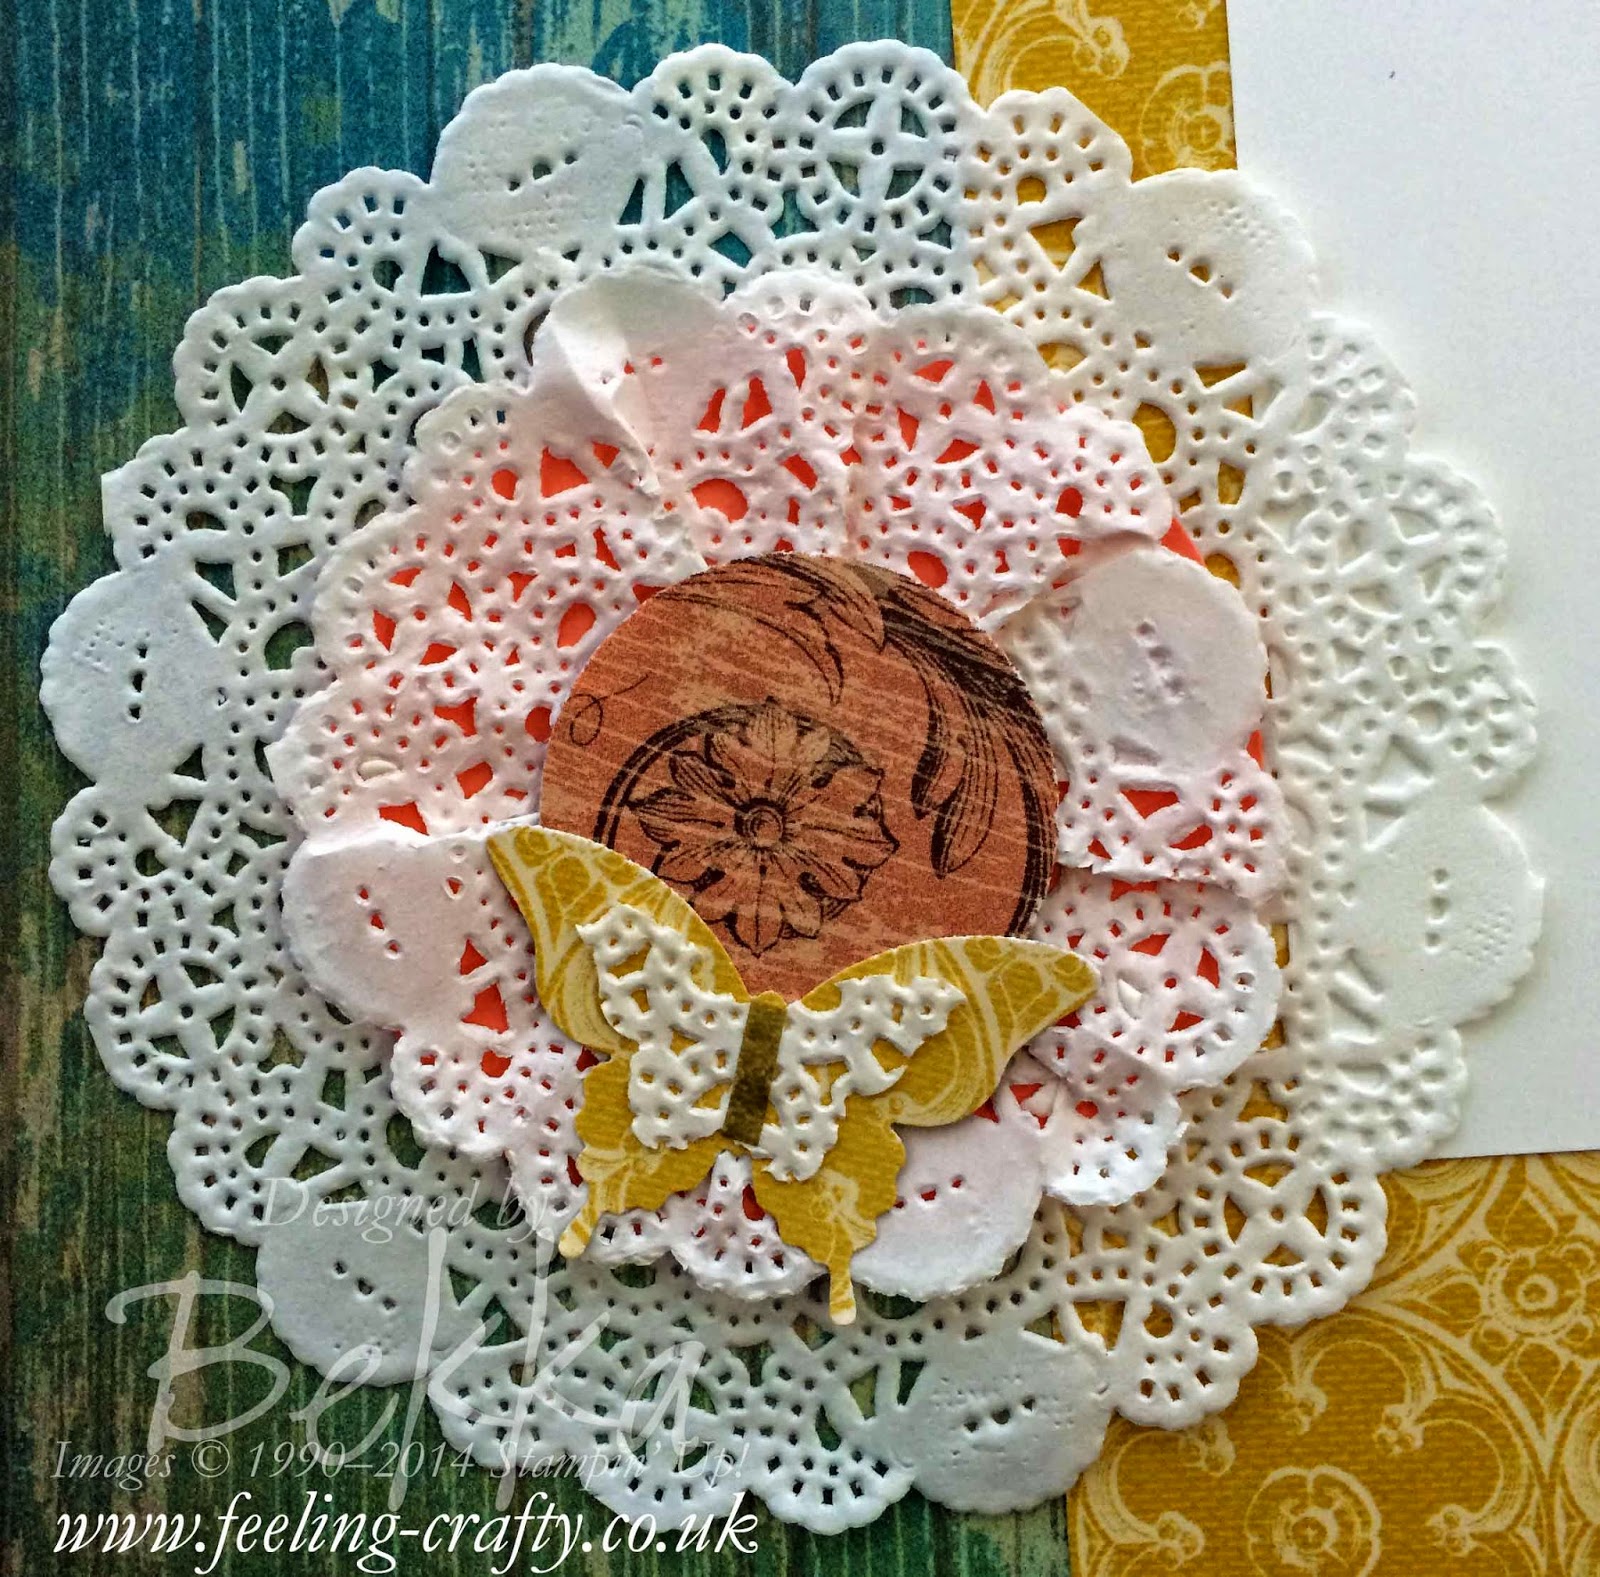 Tea Lace Doiky Fun with Soho Subway Papers - a Scrapbook Page by Stampin' Up! UK Independent Demonstrator Bekka